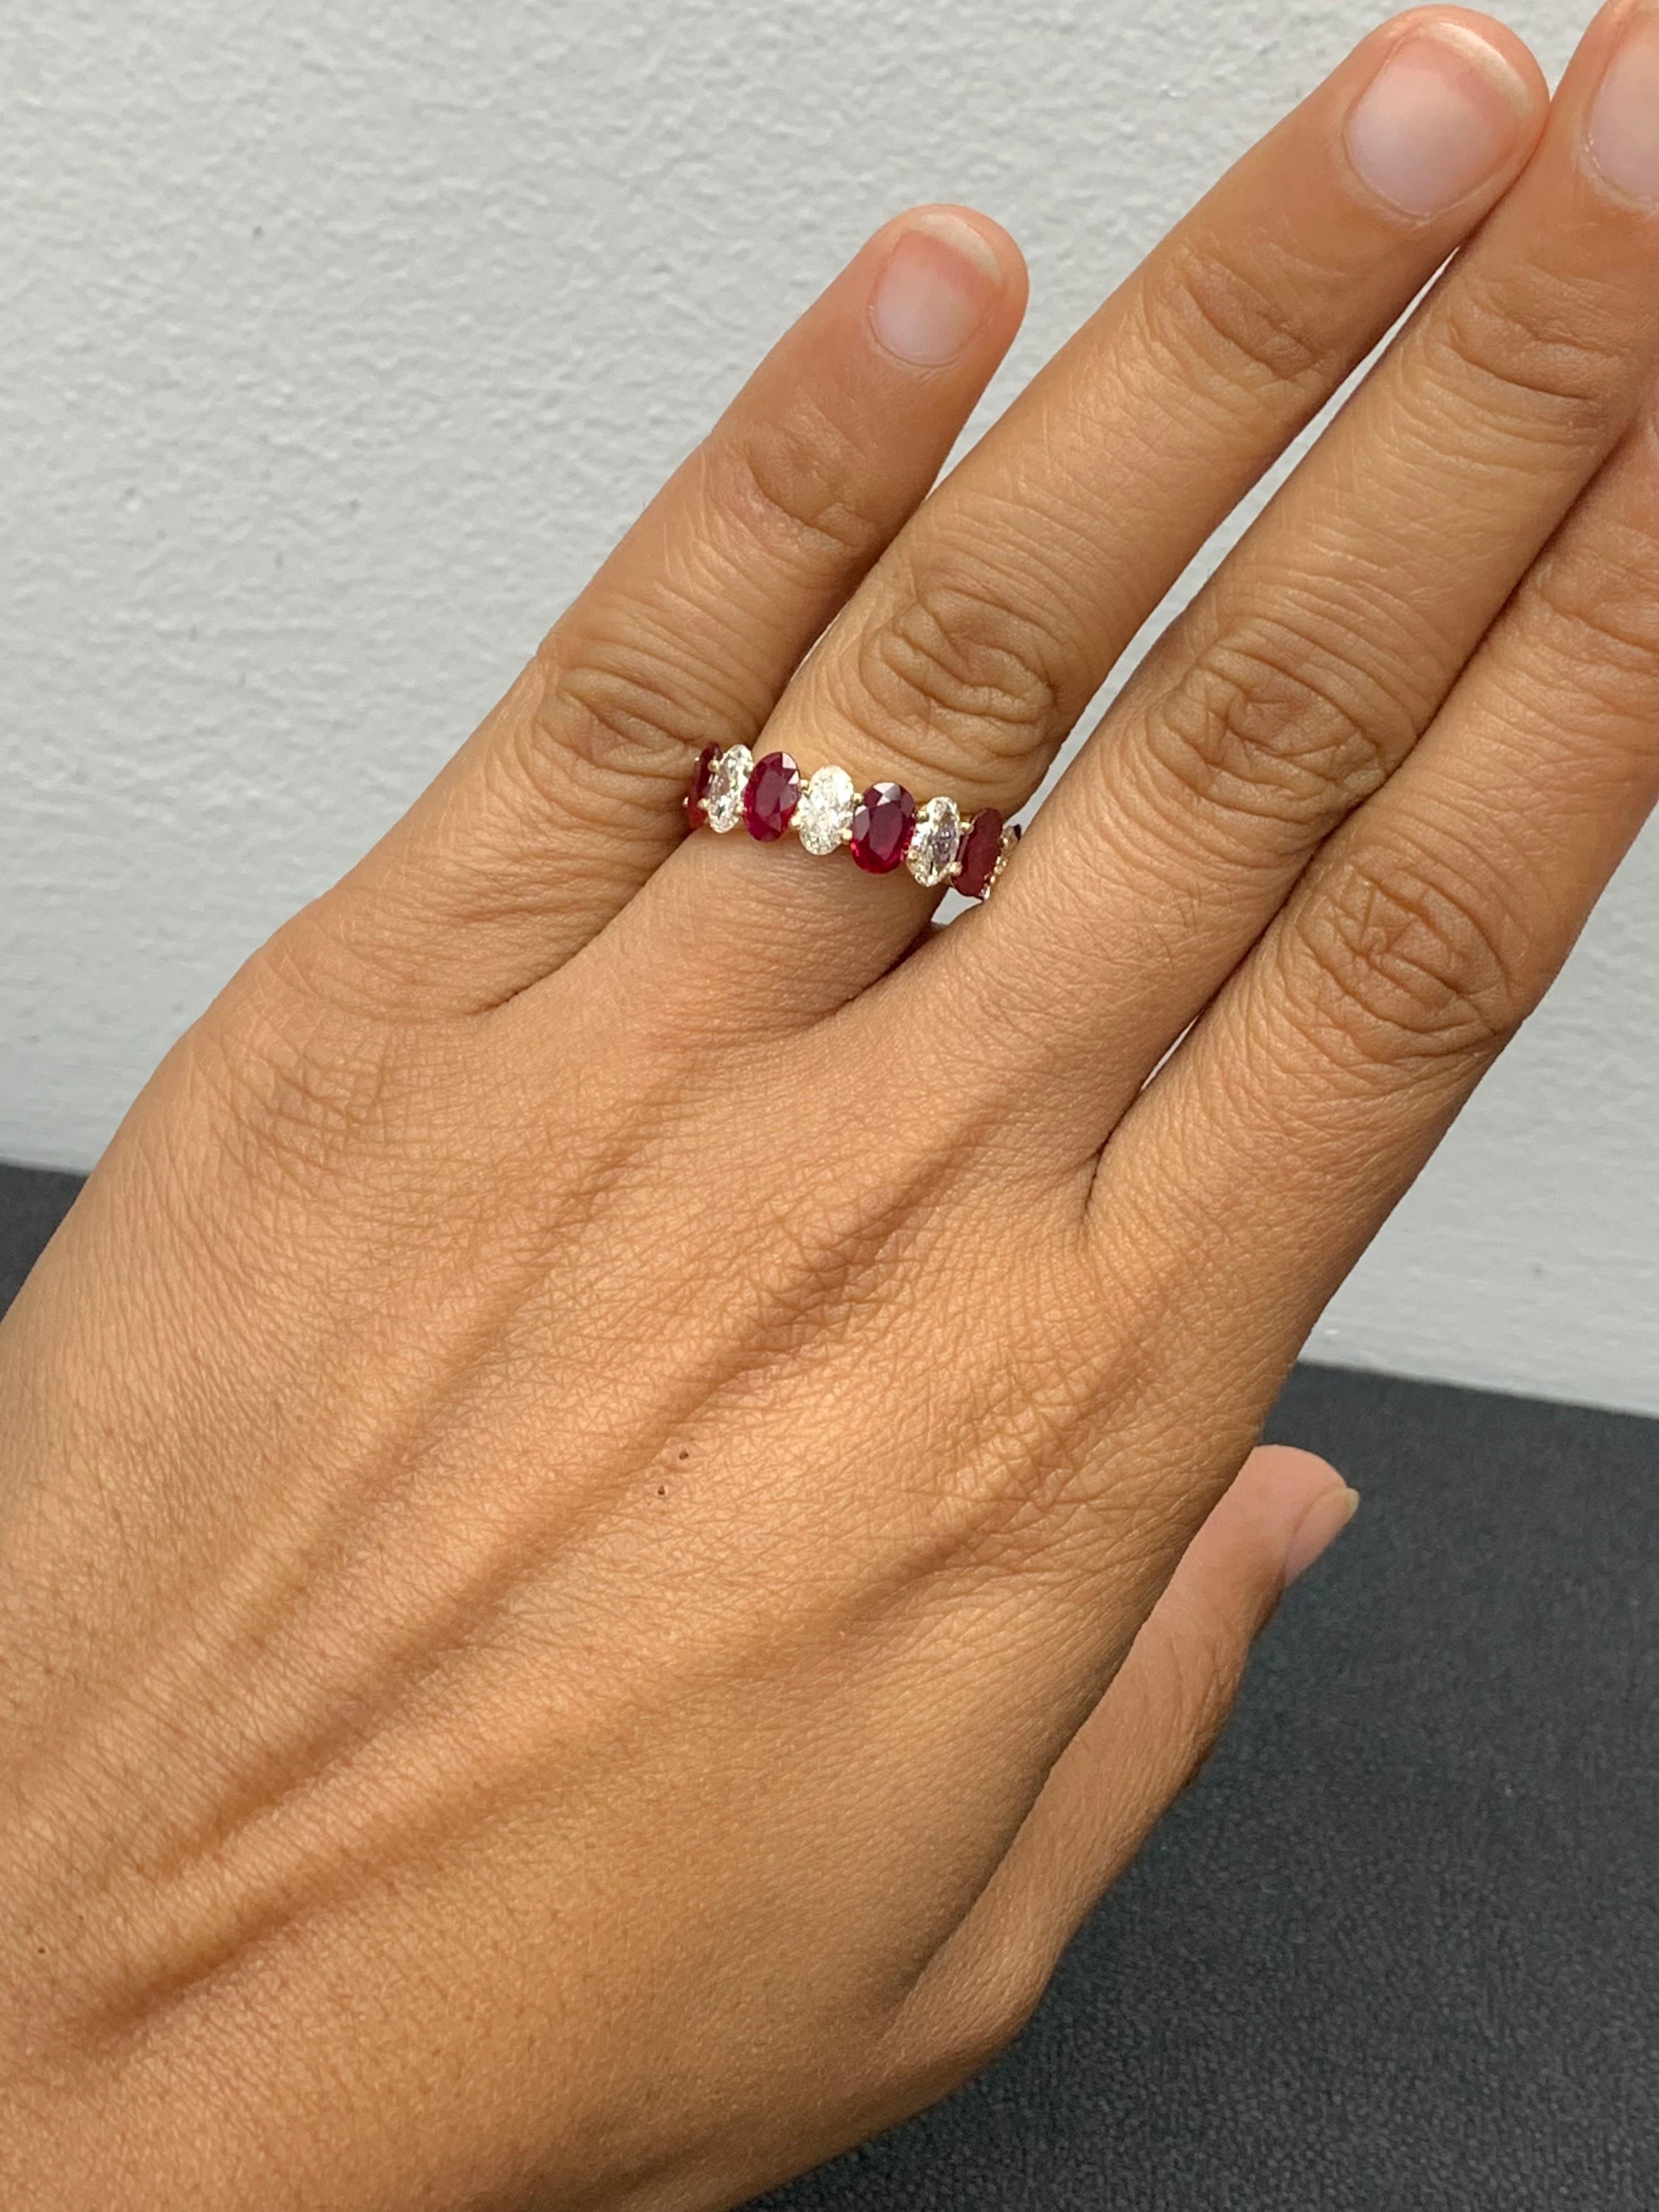 A fascinating gemstone wedding band 9 stone style showcasing 5  oval cut vivid red Rubies weighing 2.23 carats total, alternating to these red rubies are 4 oval cut brilliant colorless diamonds weighing 1.26 carats, Made in 14K Yellow Gold, Size 6.5